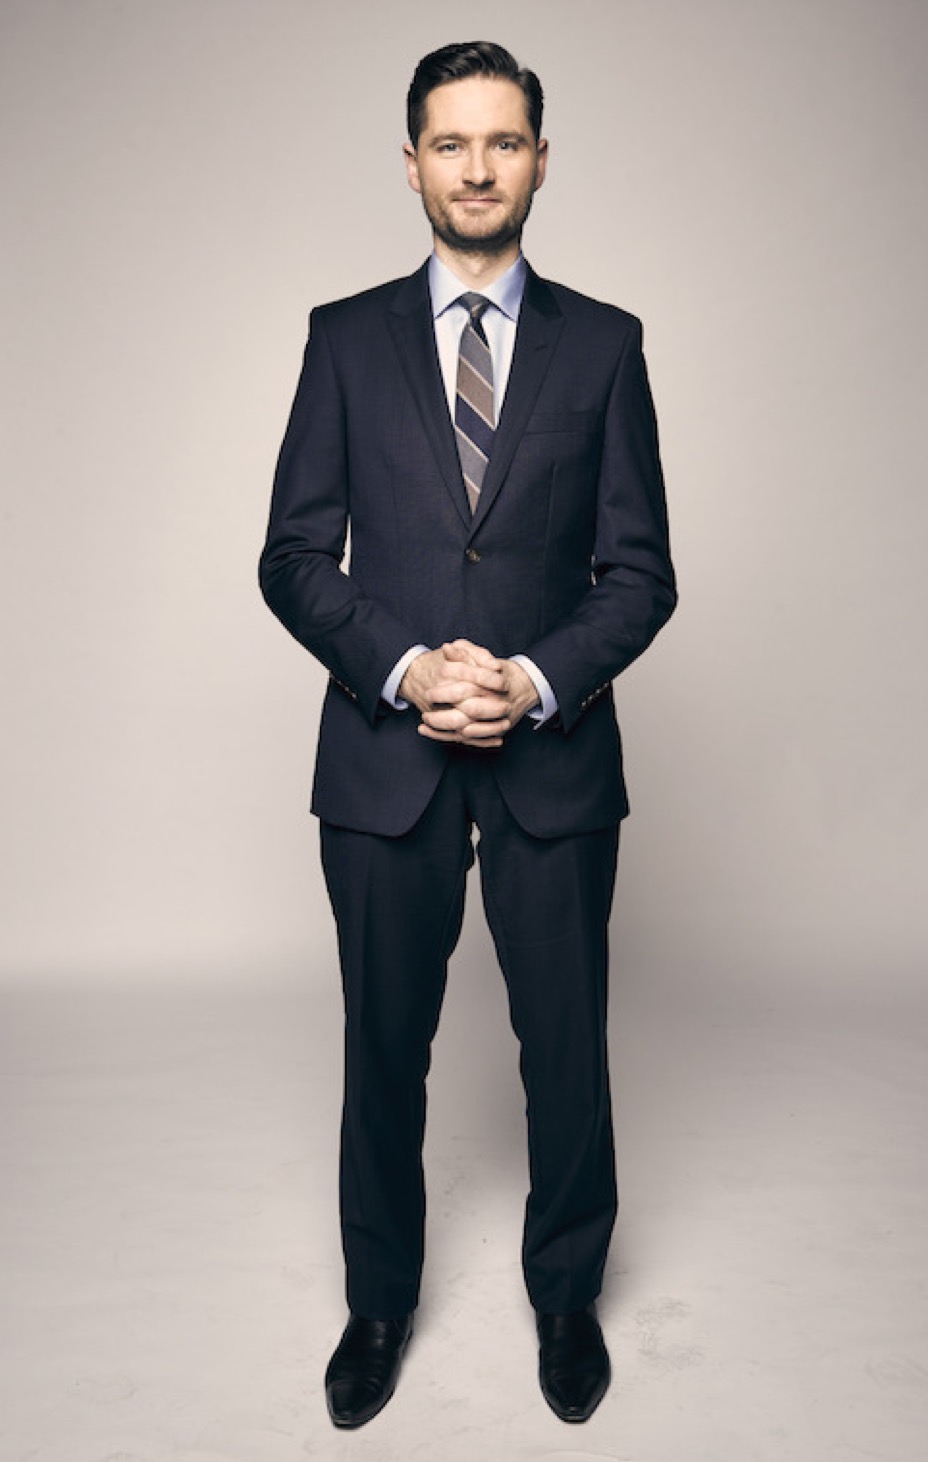 Charlie Pickering image - supplied/ABCTV